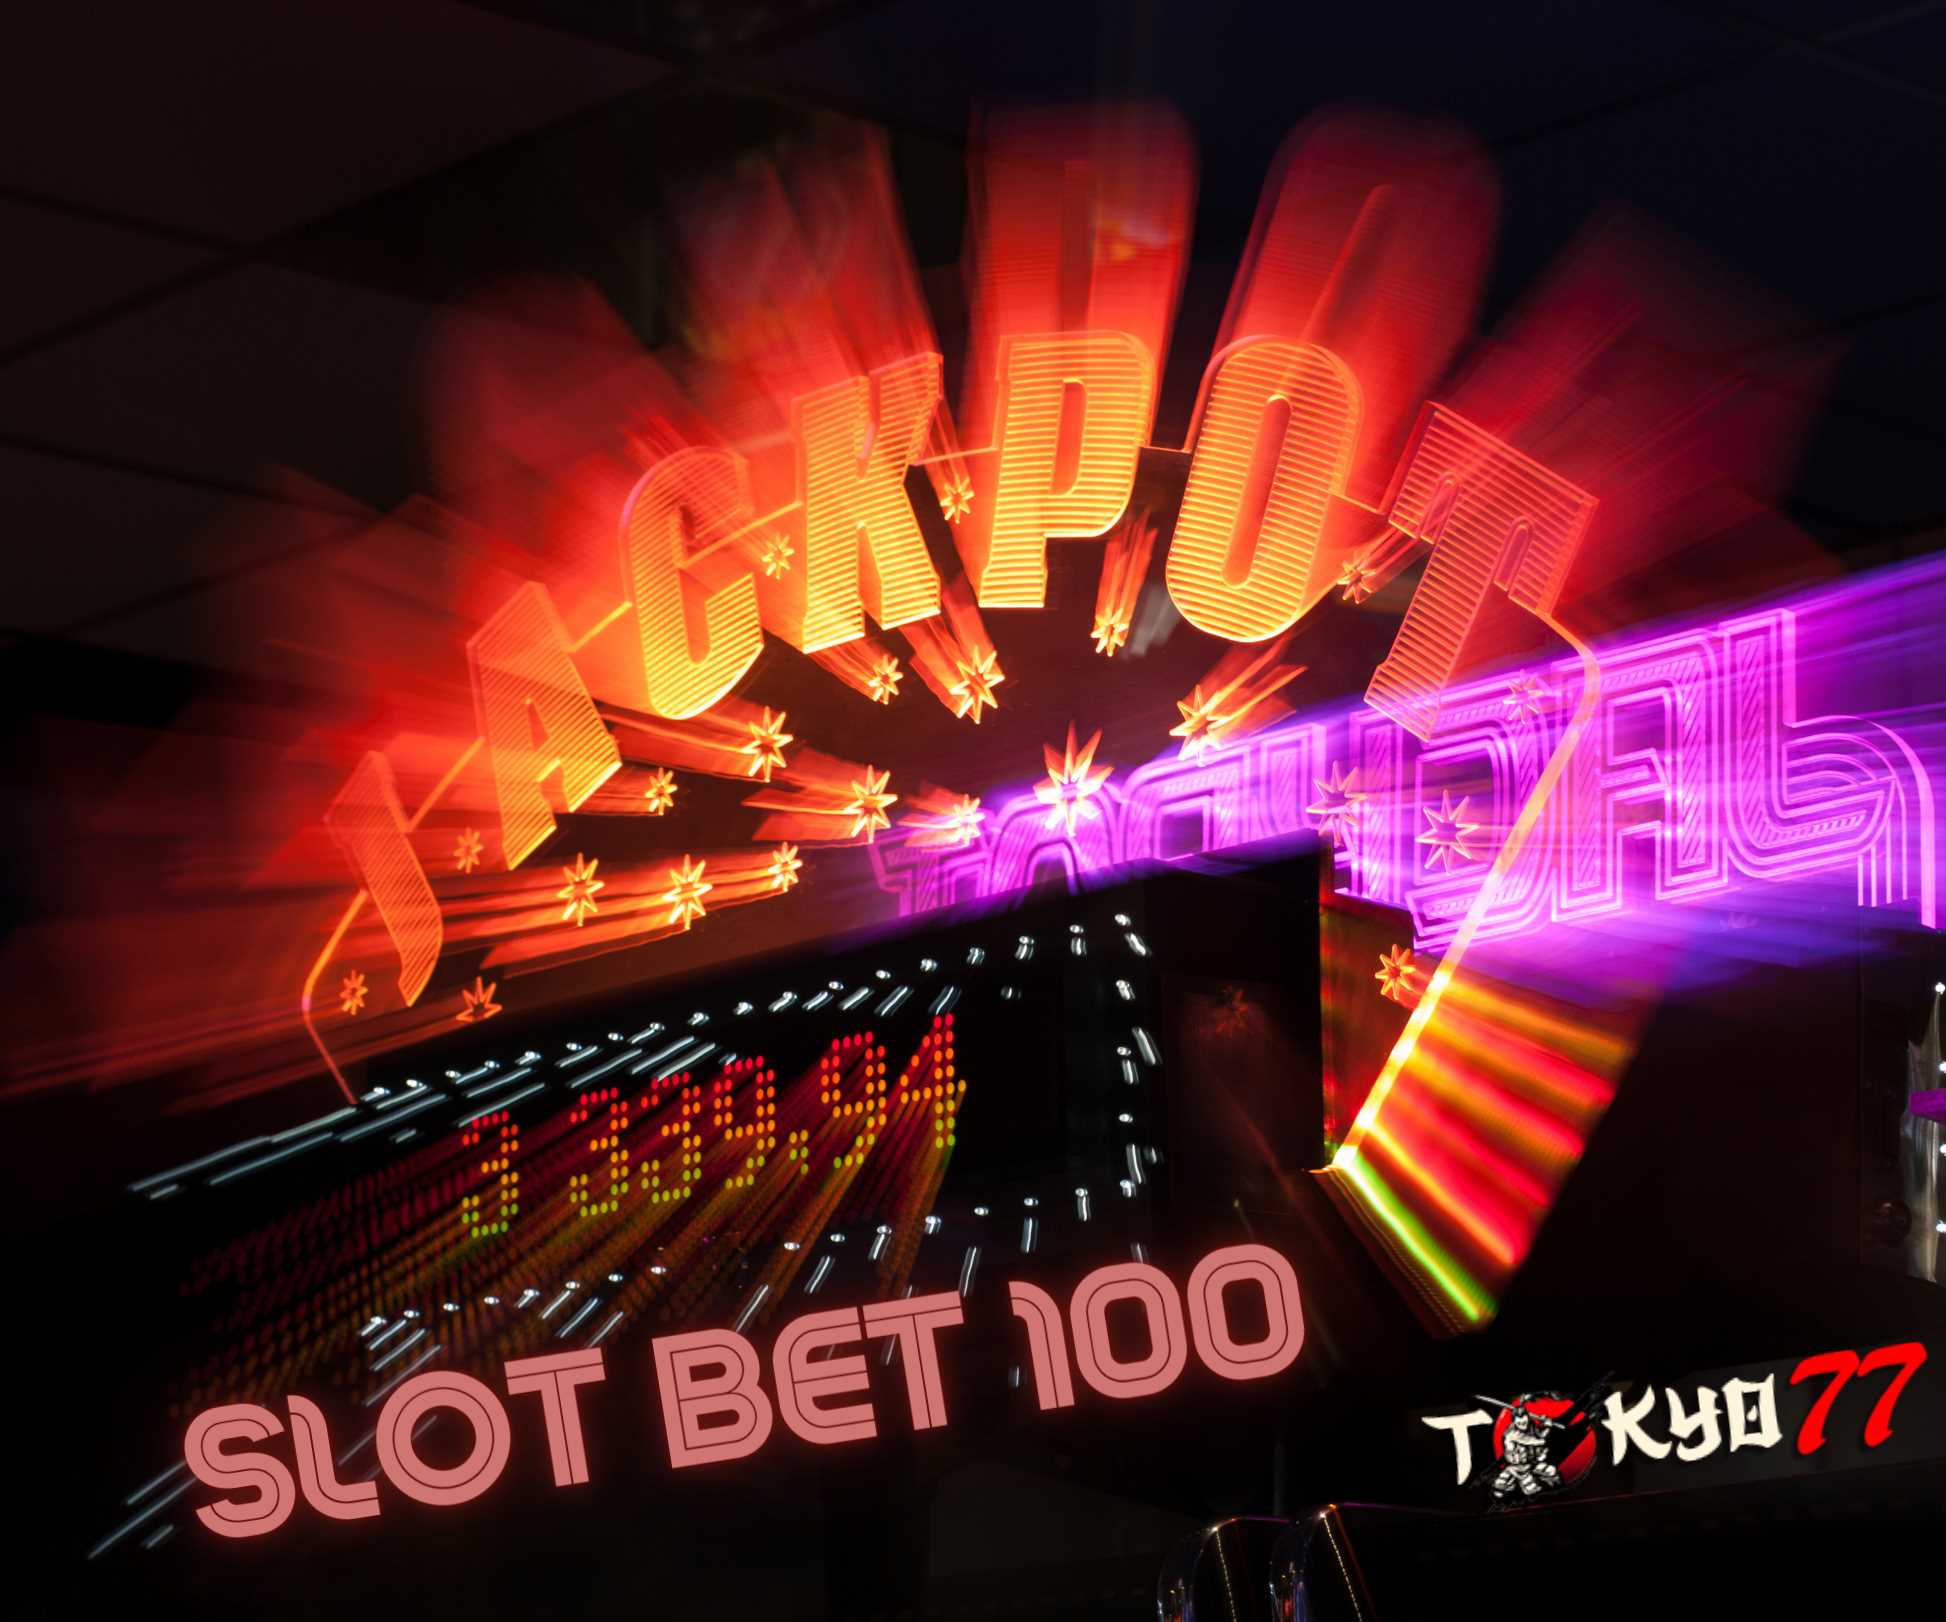 Revealing the Jackpot Percentage Rate of Slot Bet 100